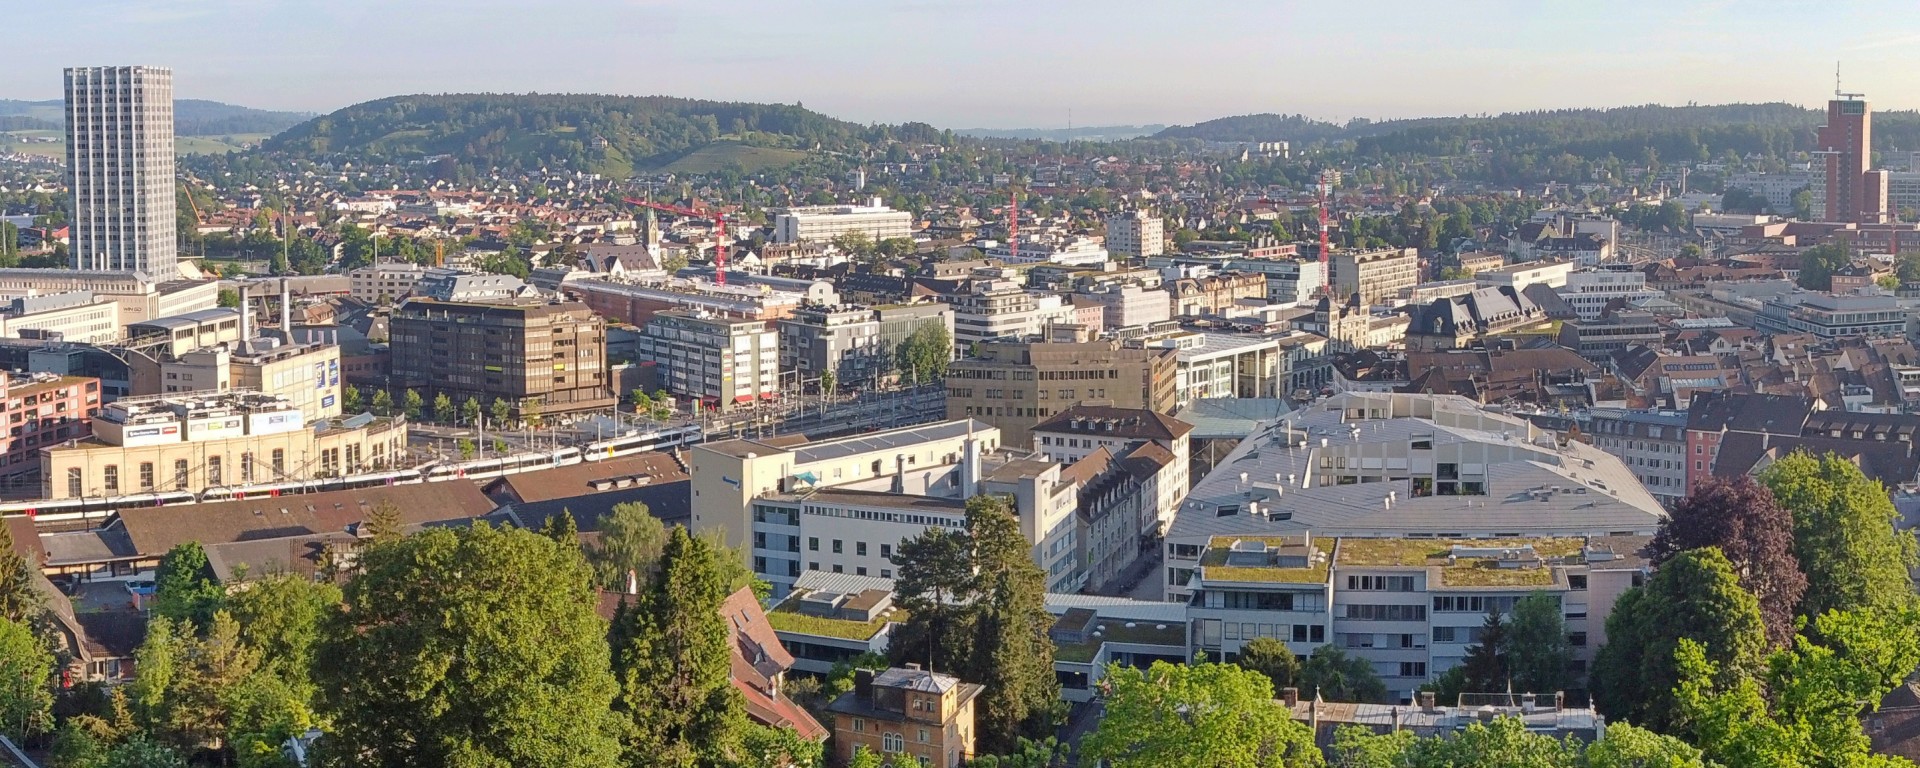 The location of Vontobel in the city Winterthur - Panorama over the city of Winterthur